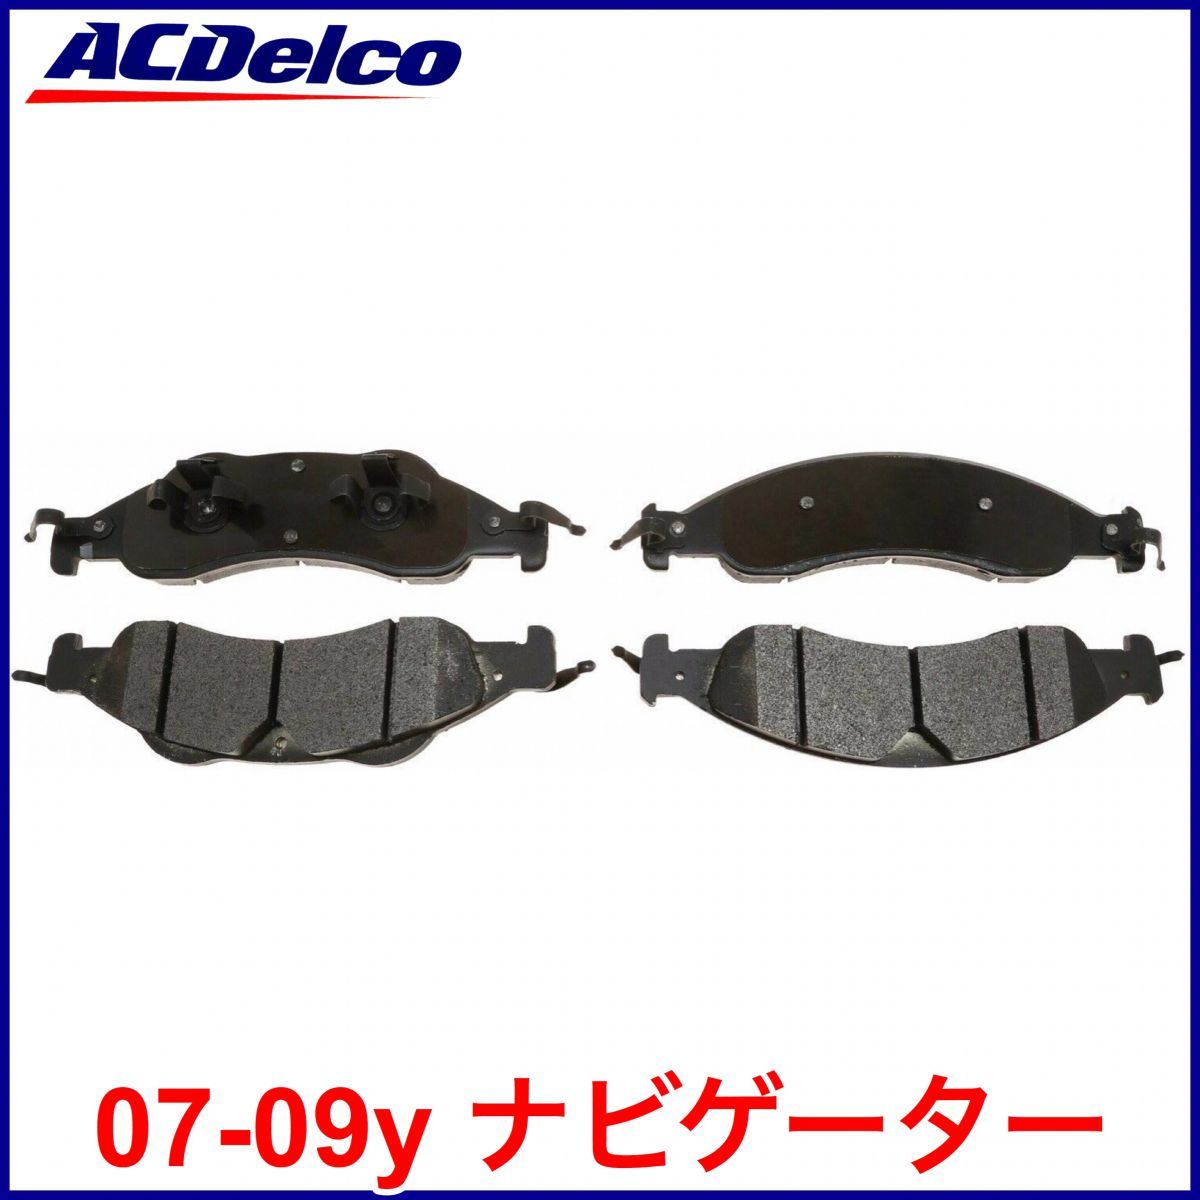  tax included the cheapest ACDelco AC Delco Advantage OE front front side brake pad 07-09y Navigator Expedition prompt decision immediate payment stock goods 08